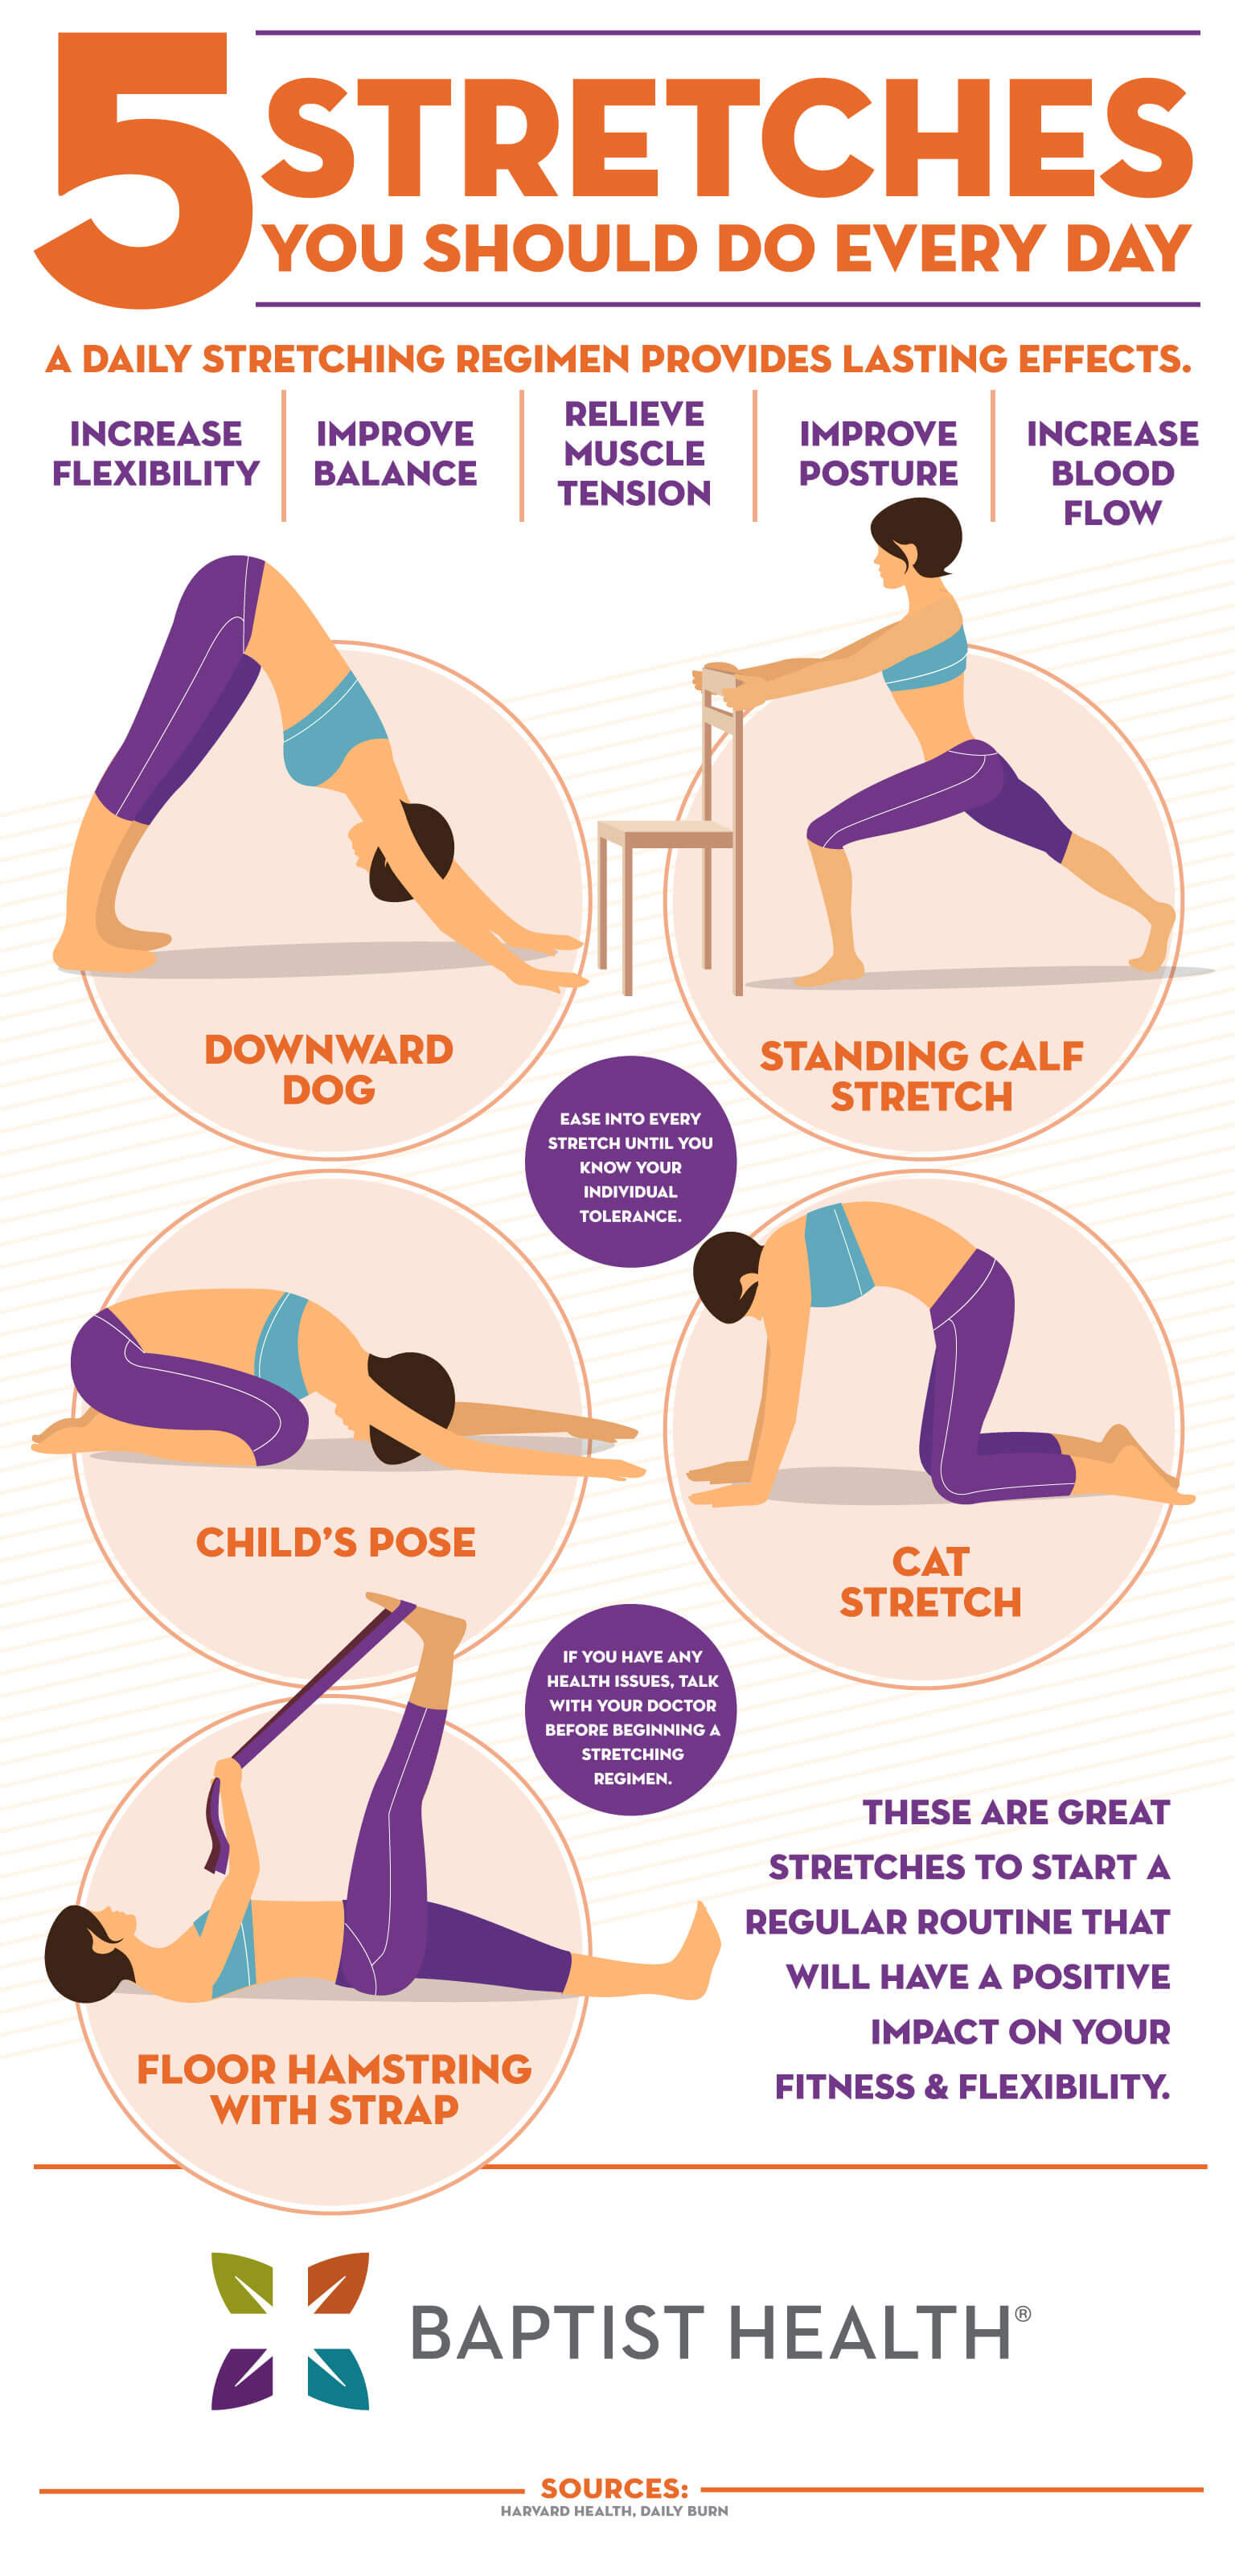 Where You Have to Stretch